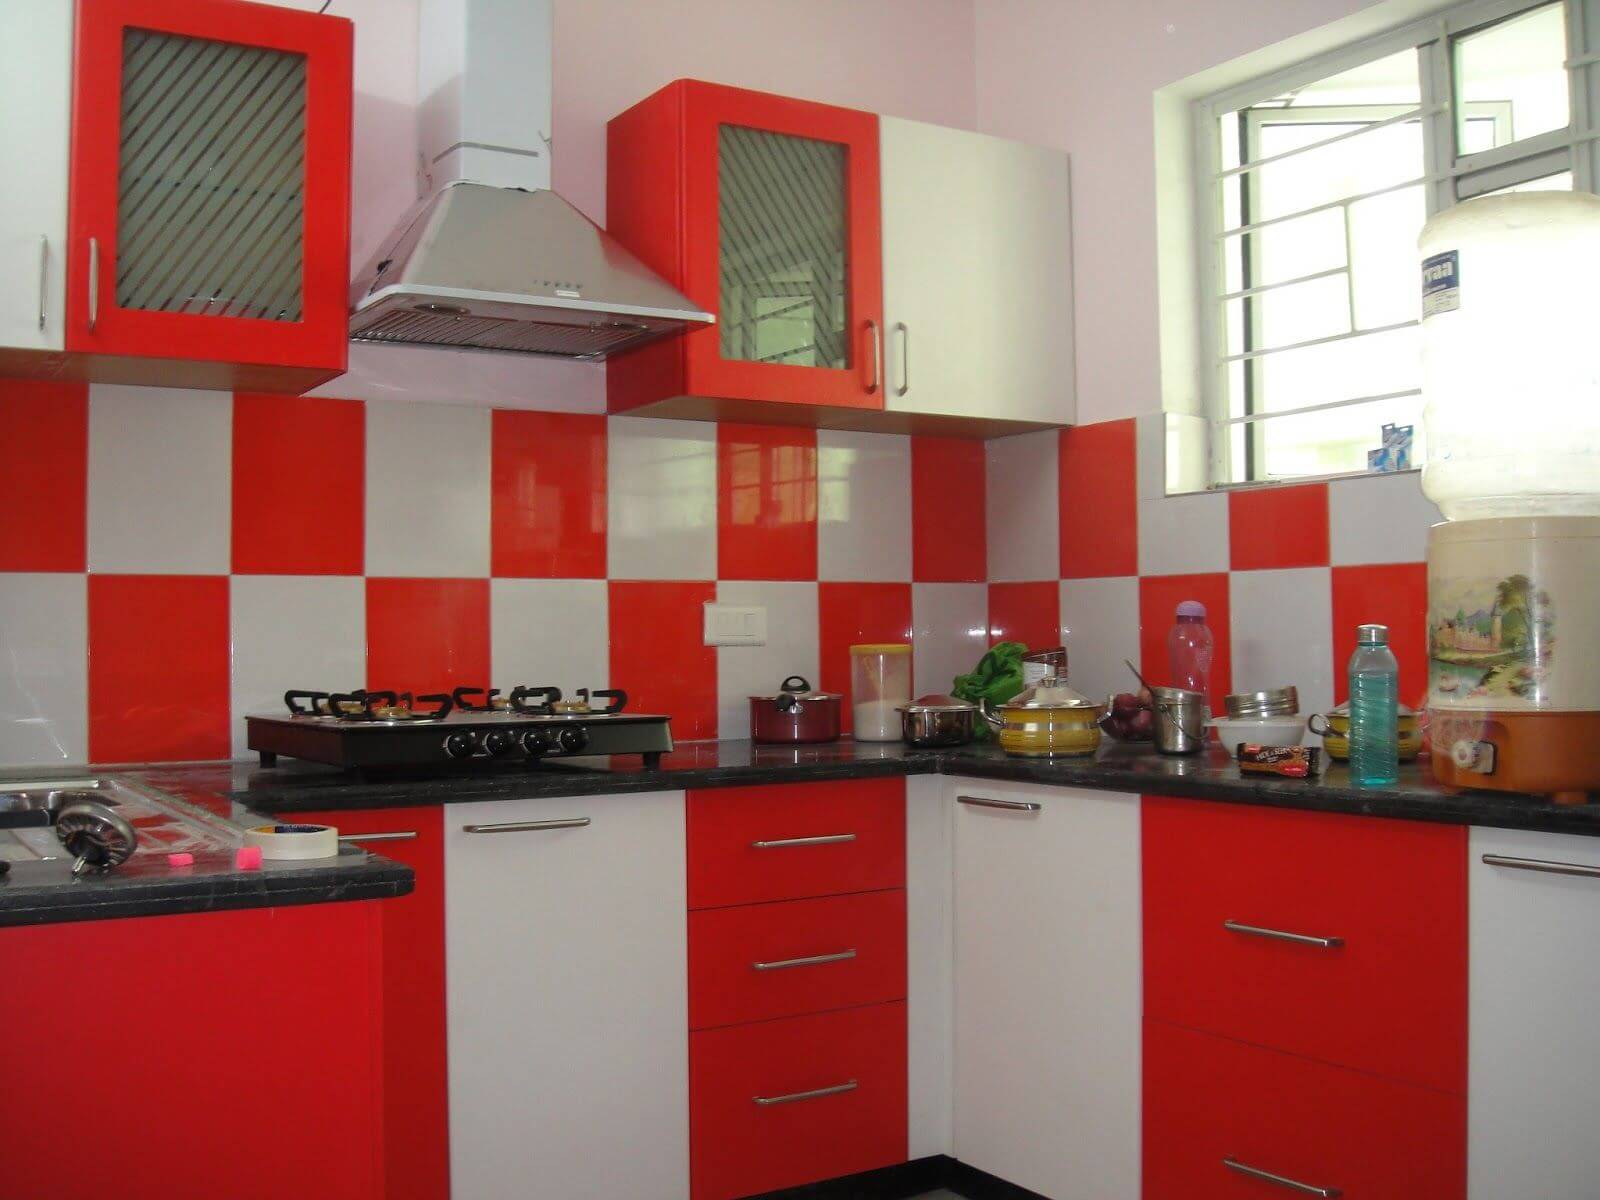 Color of the kitchen cabinet in red and white